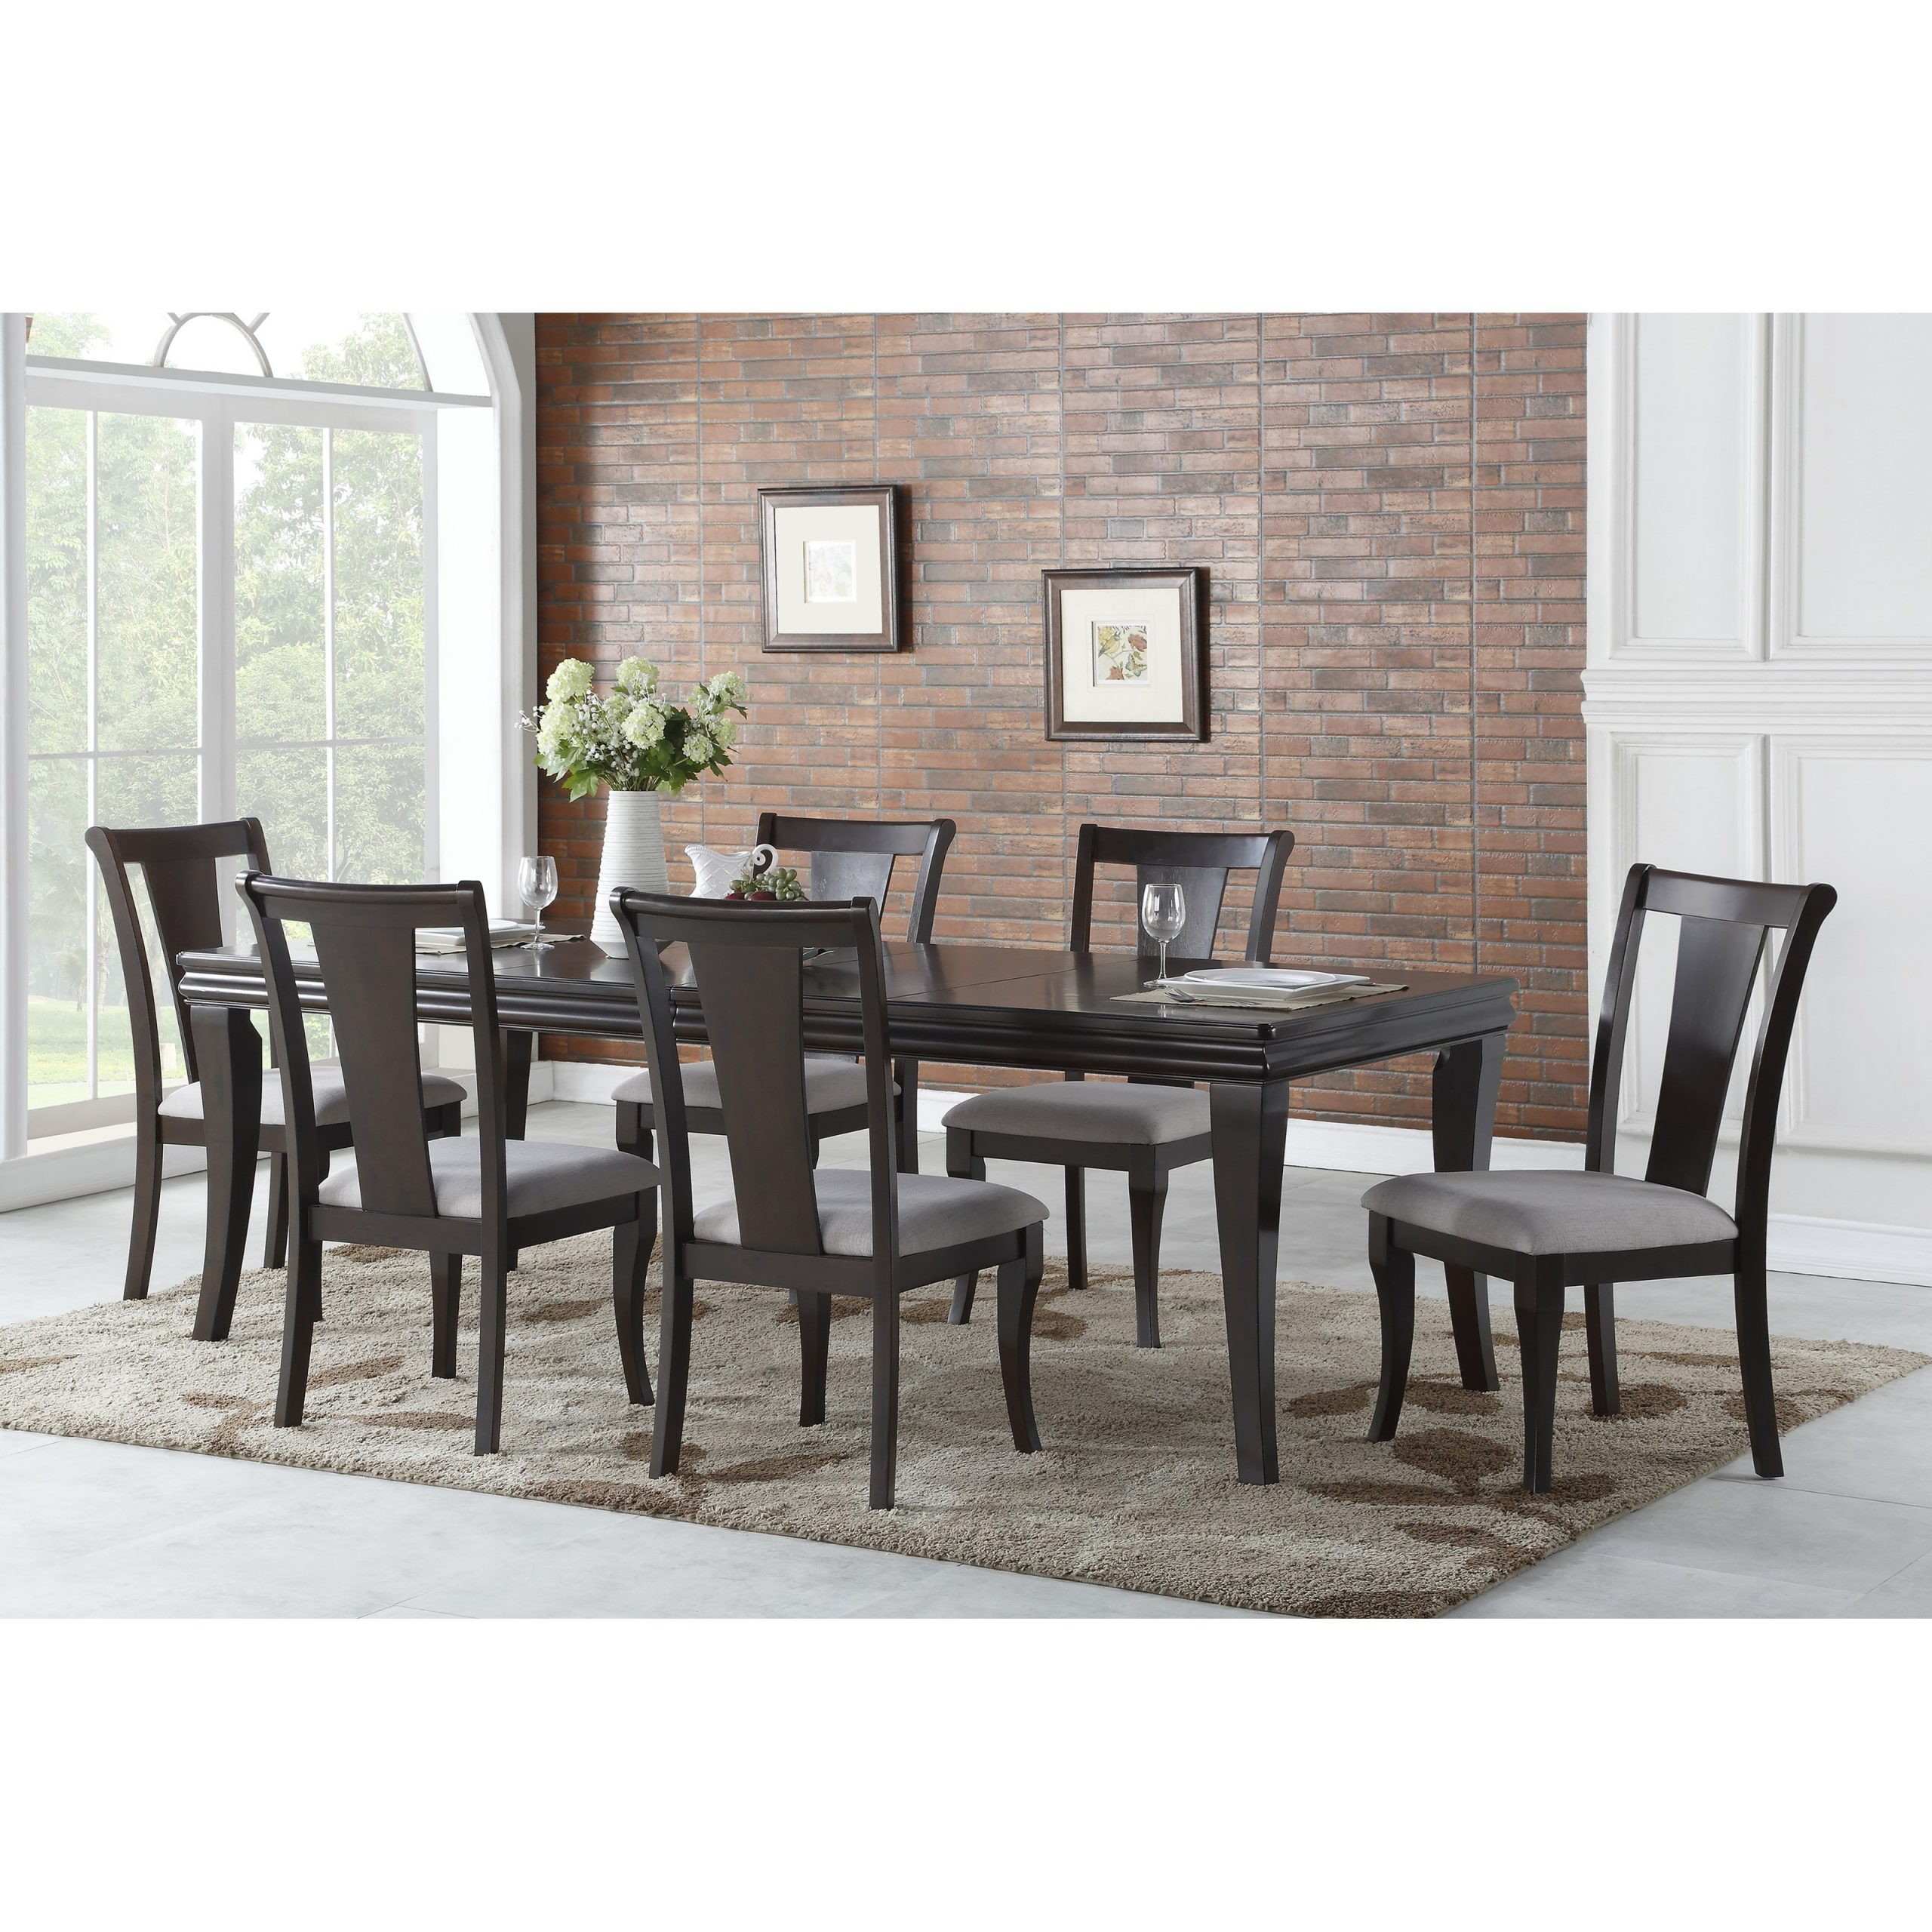 Steve Silver Aubrey Transitional Dining Room Set Northeast within measurements 3200 X 3200